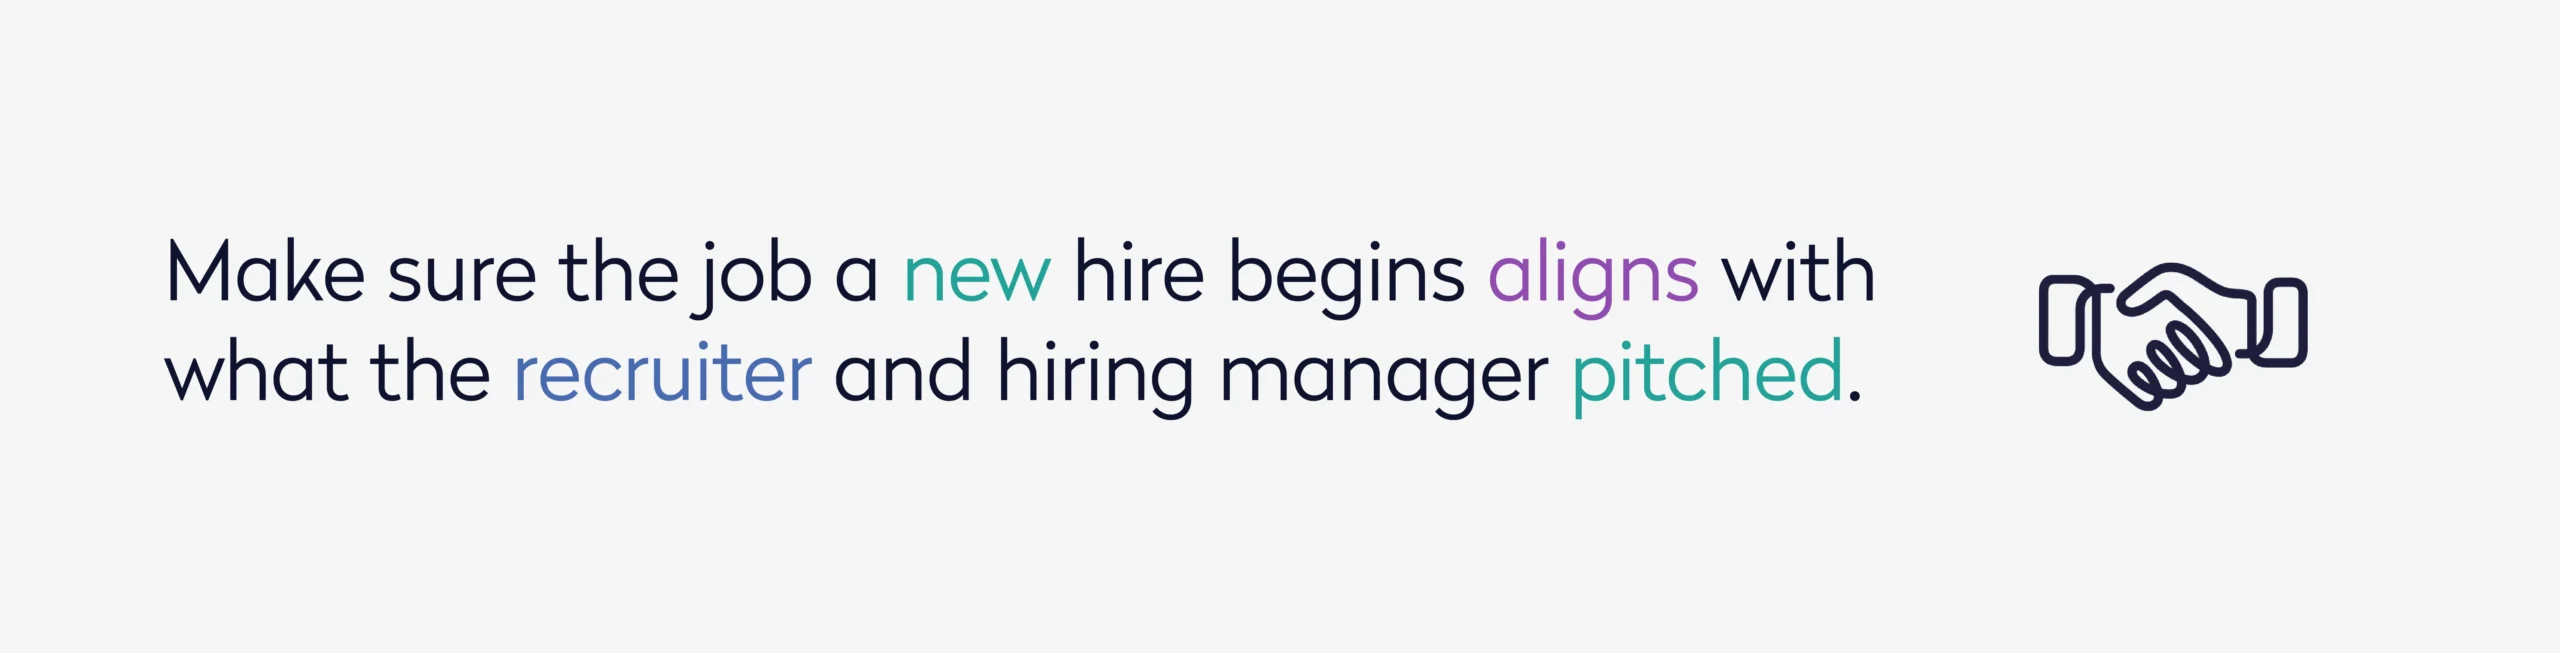 Make sure the job a new hire begins aligns with what the recruiter and hiring manager pitched